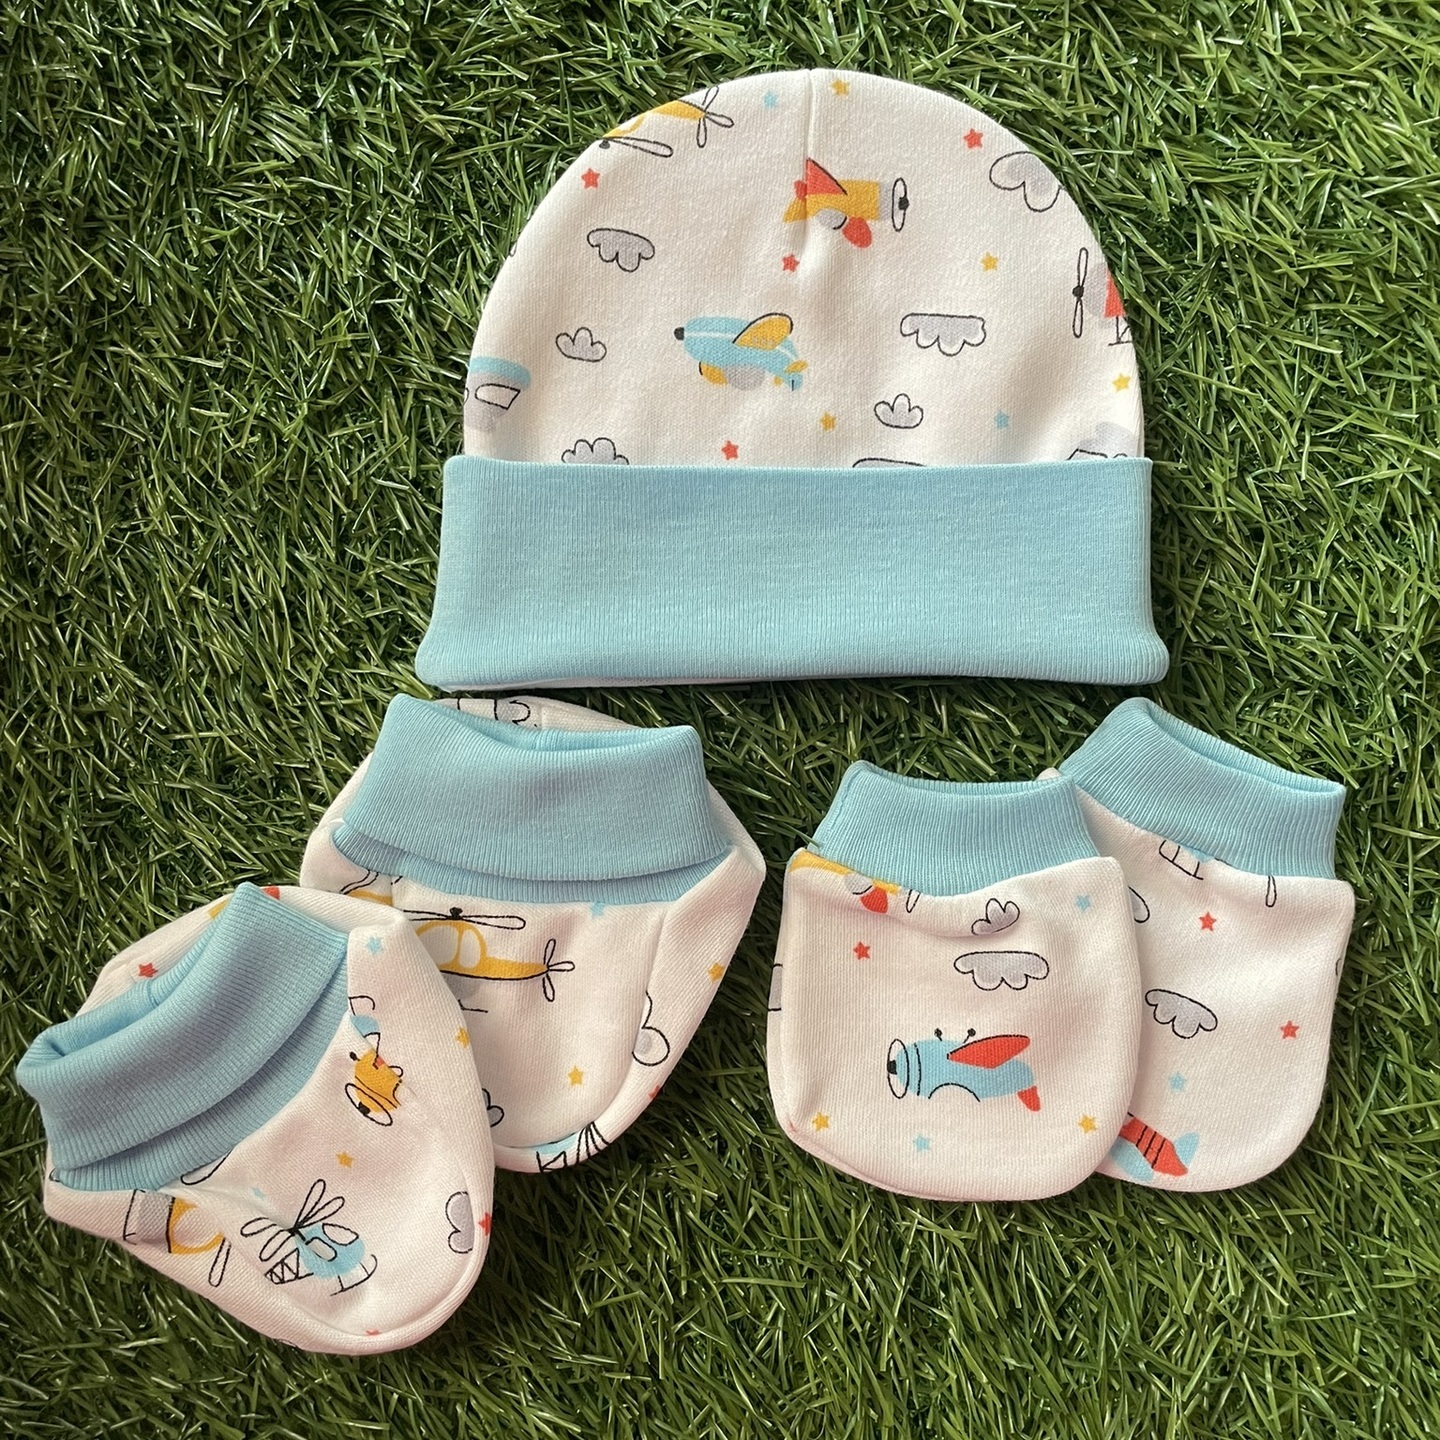 Cradle Togs  Newborn Baby Cap Mitten Booties Set Rs 340 Only White & Skyblue